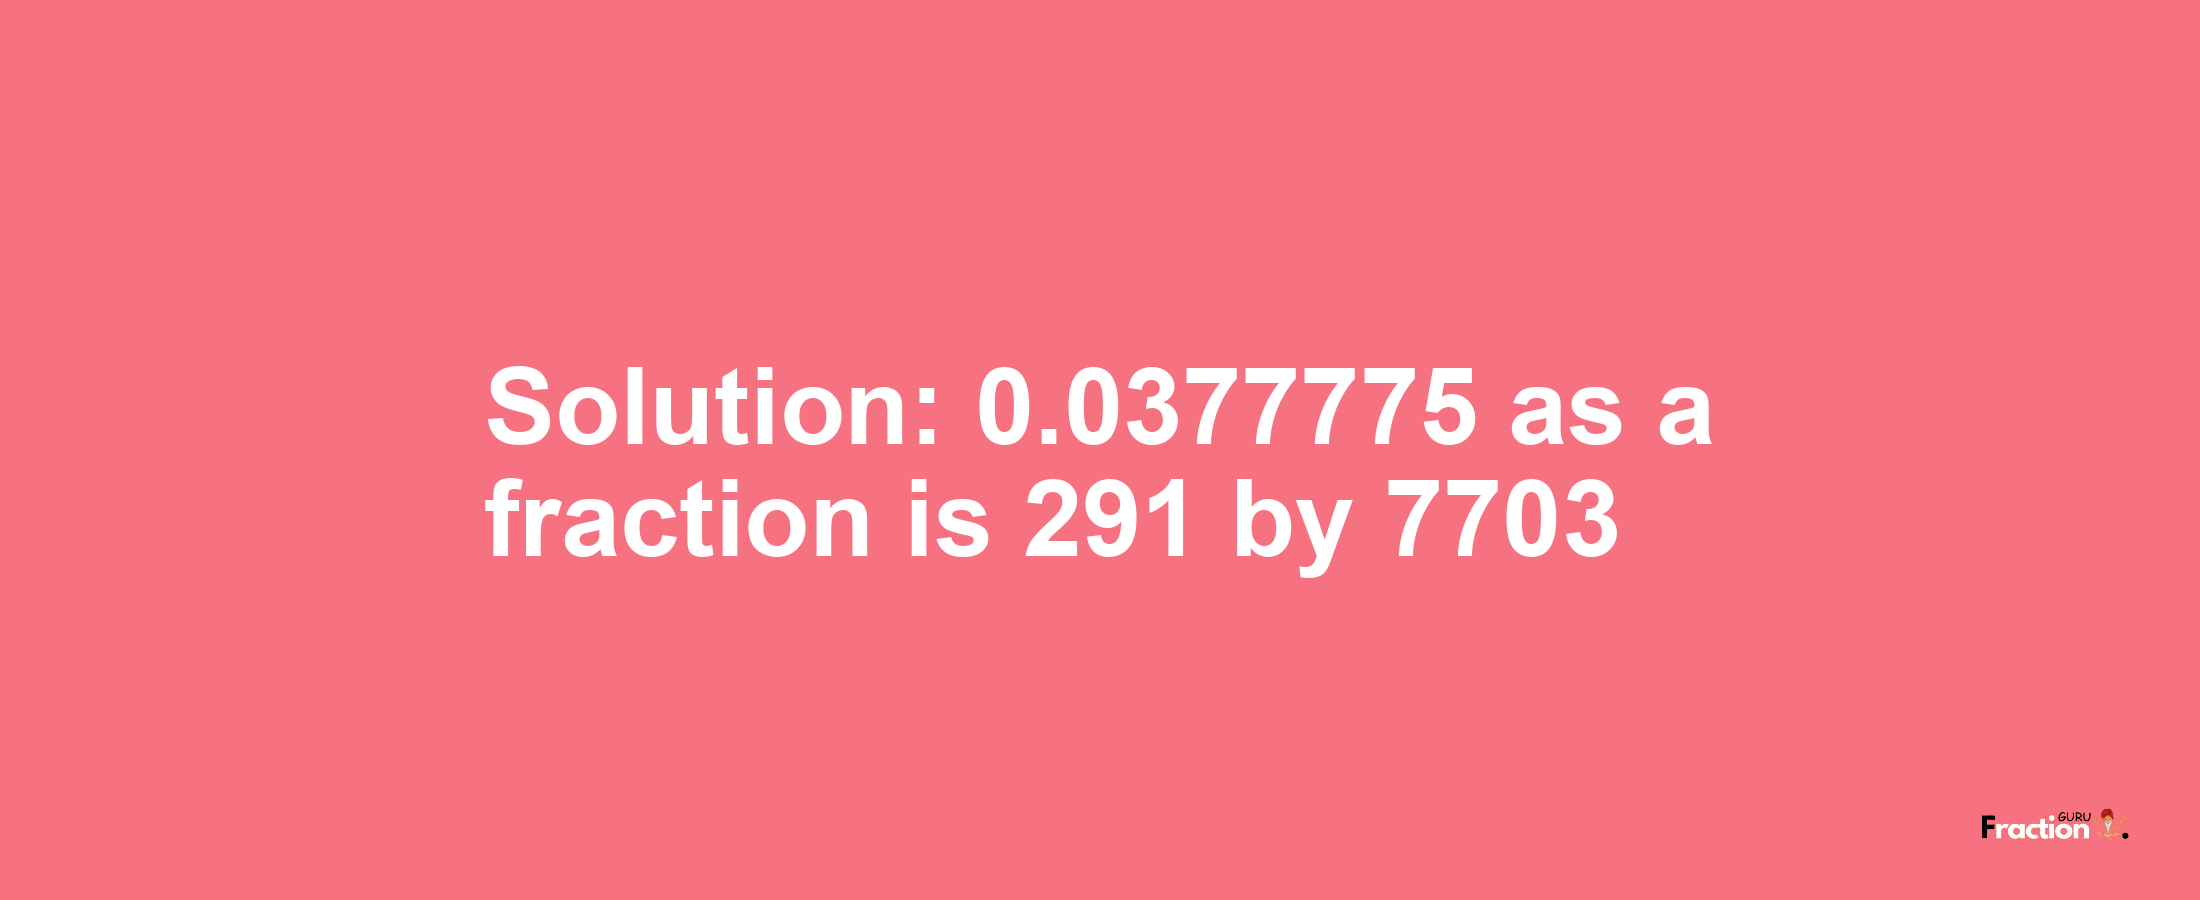 Solution:0.0377775 as a fraction is 291/7703